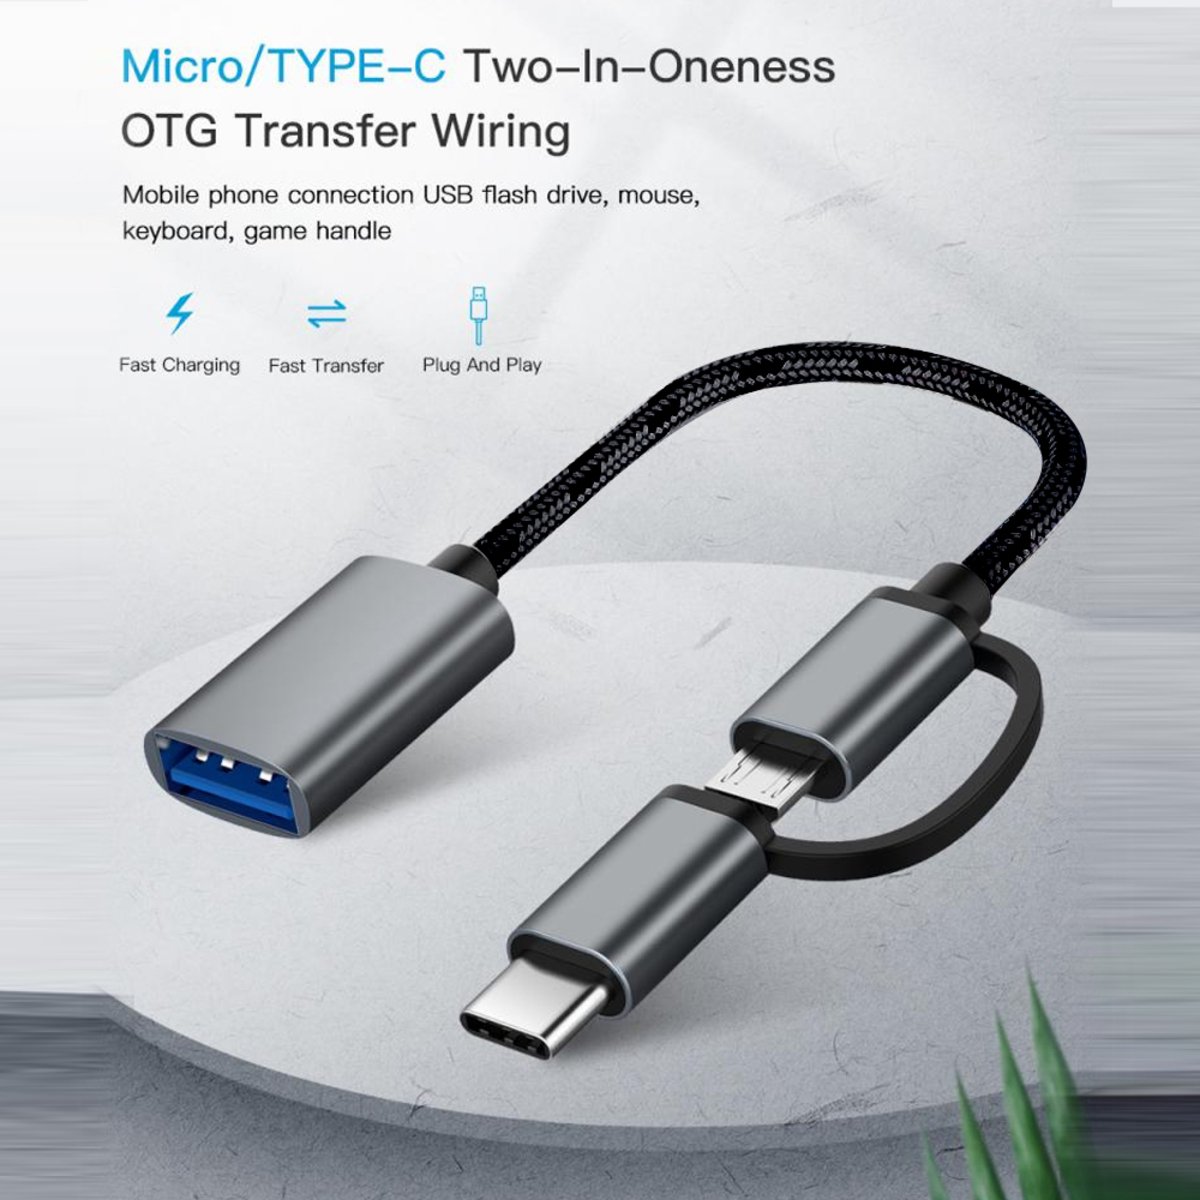 Trands 2 in 1 USB 3.0 Adapter OTG Cable CA344